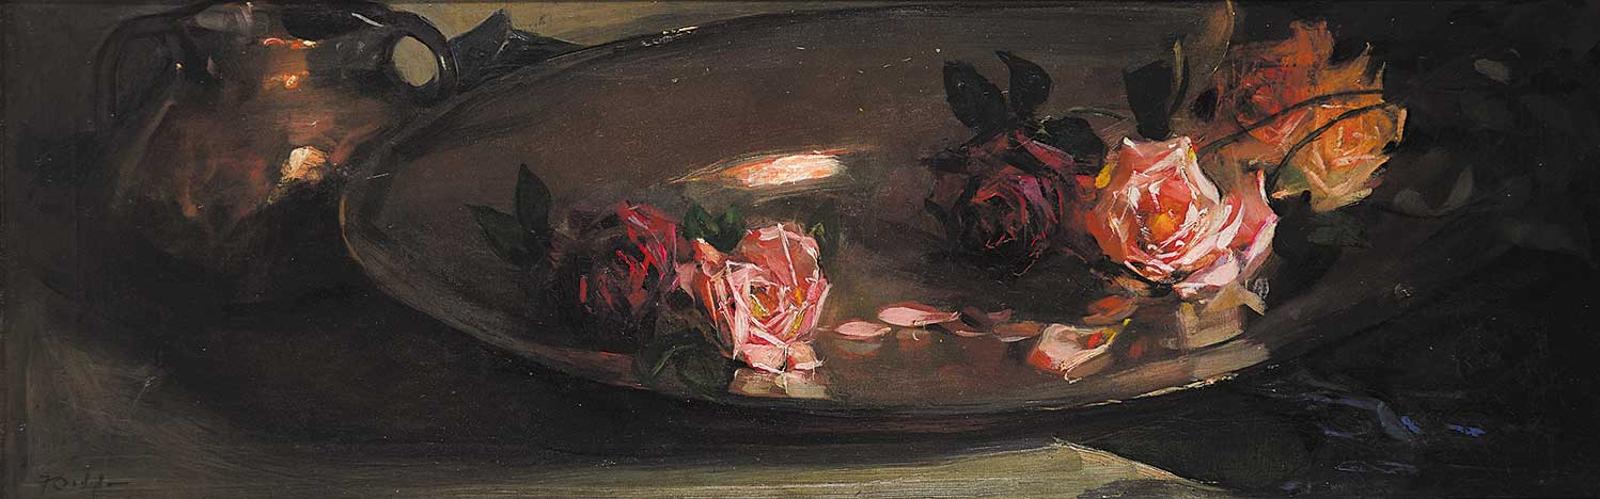 Florence Emily Carlyle (1864-1923) - Roses and Brass